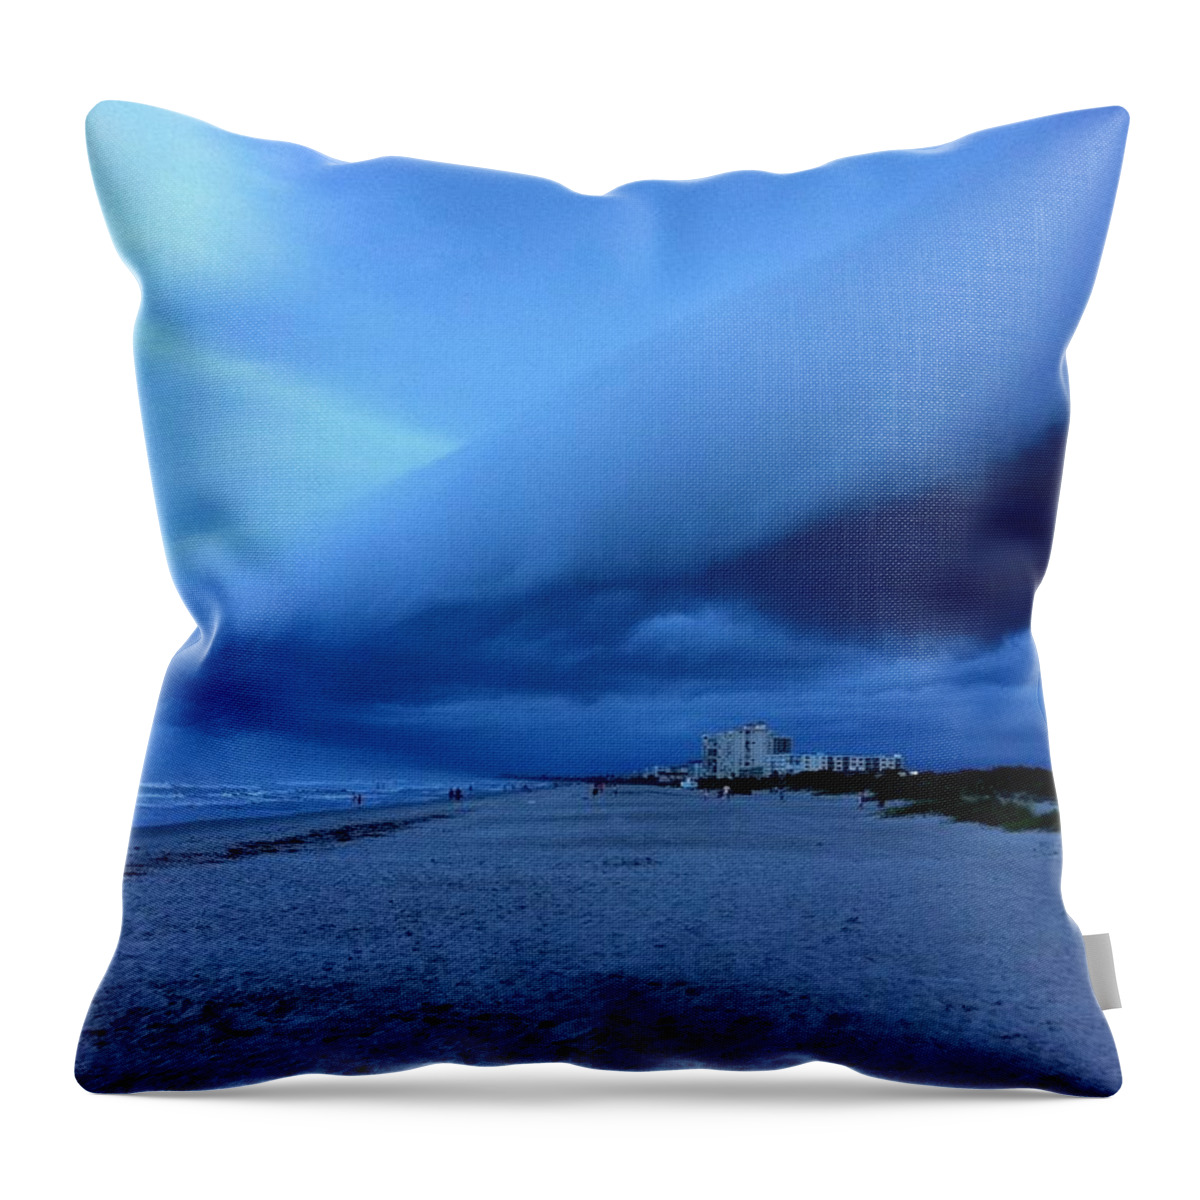 Magnificence Throw Pillow featuring the photograph Magnificence by Carlos Avila